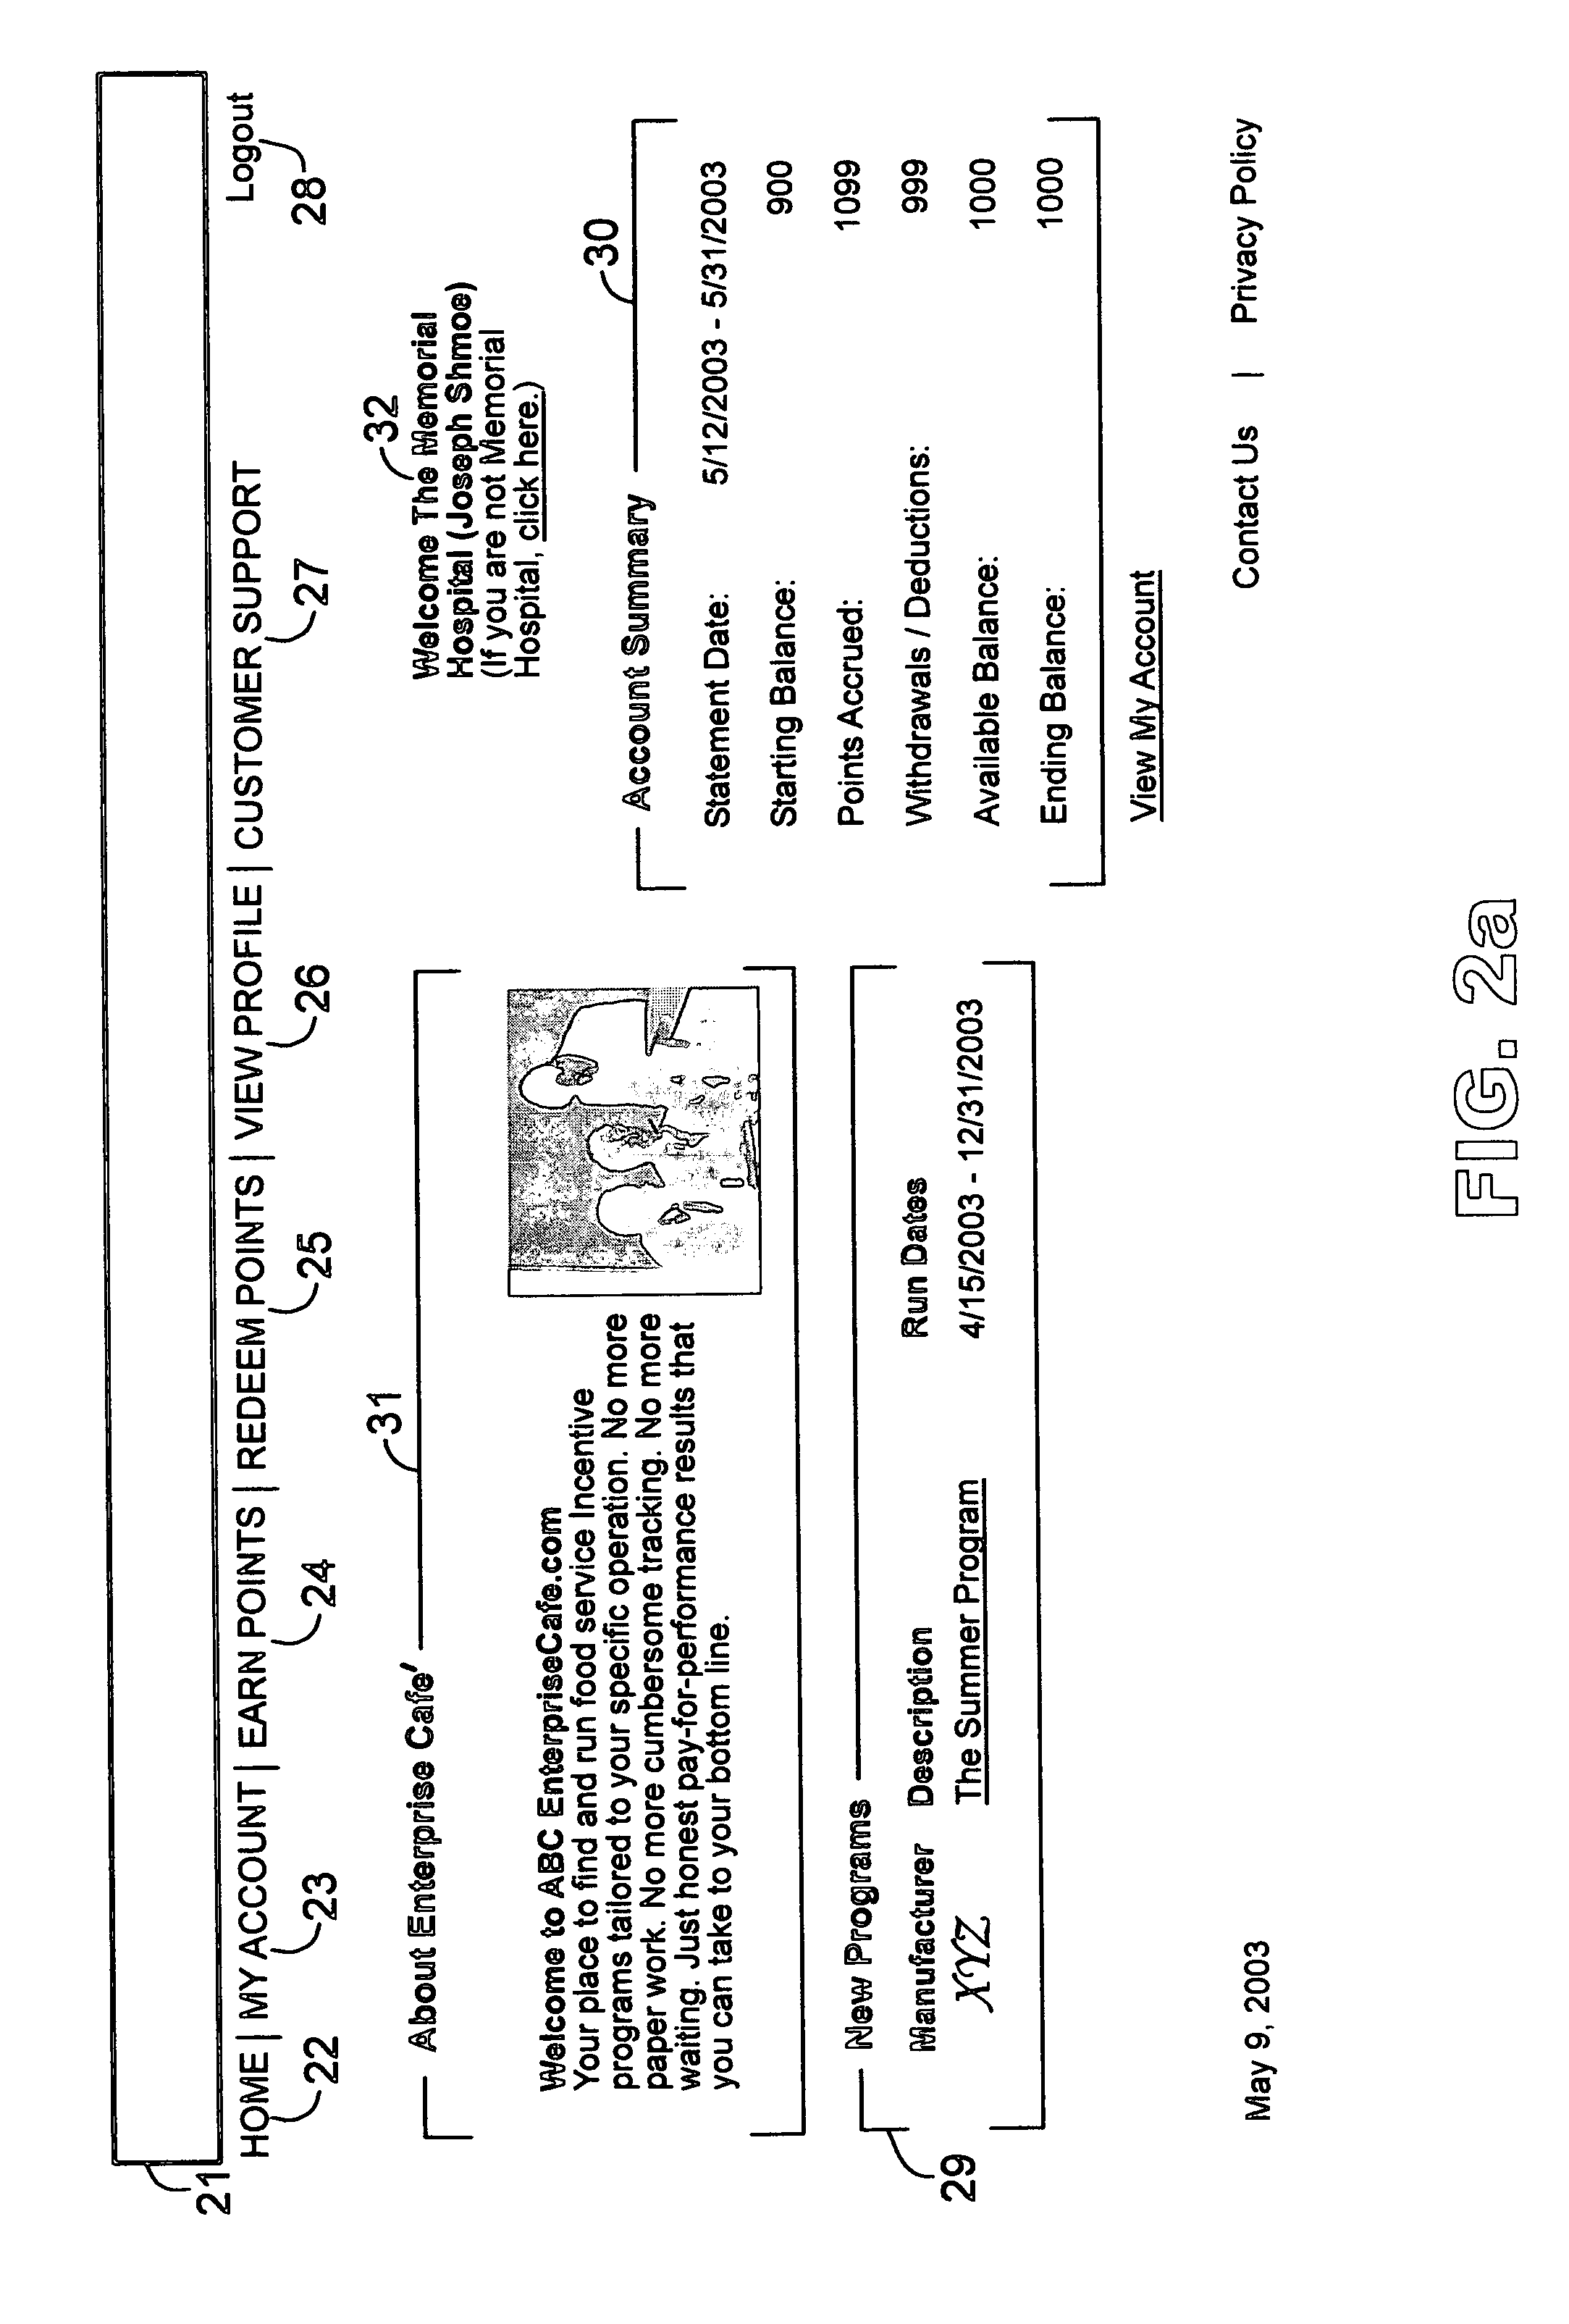 Method and apparatus for providing internet based marketing channels